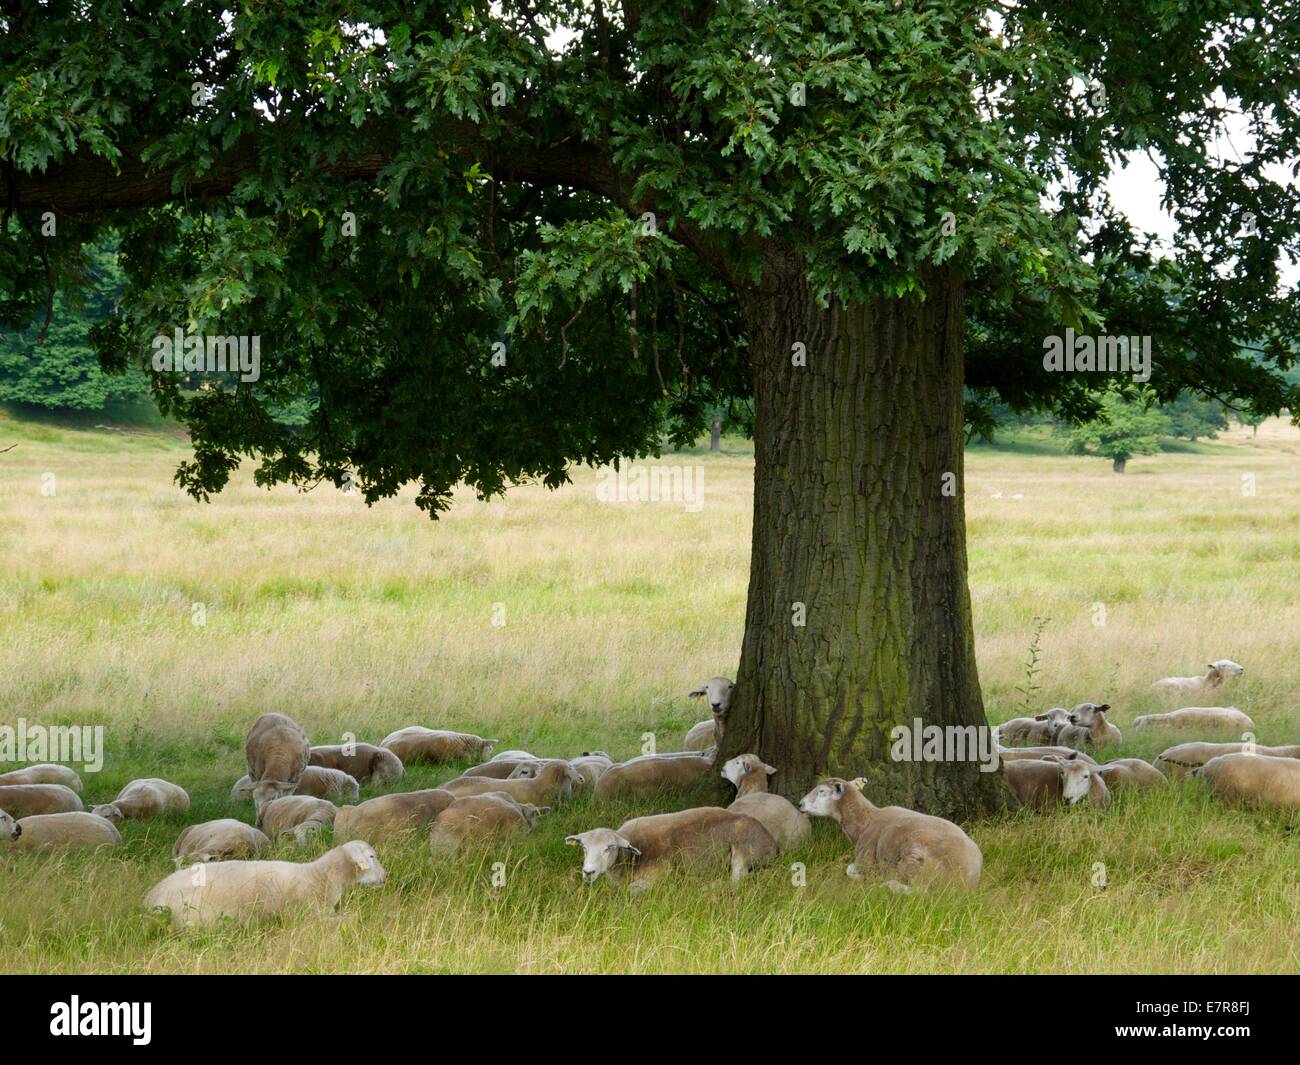 Sheep taking shelter from the sun in the shade of a tree Stock Photo